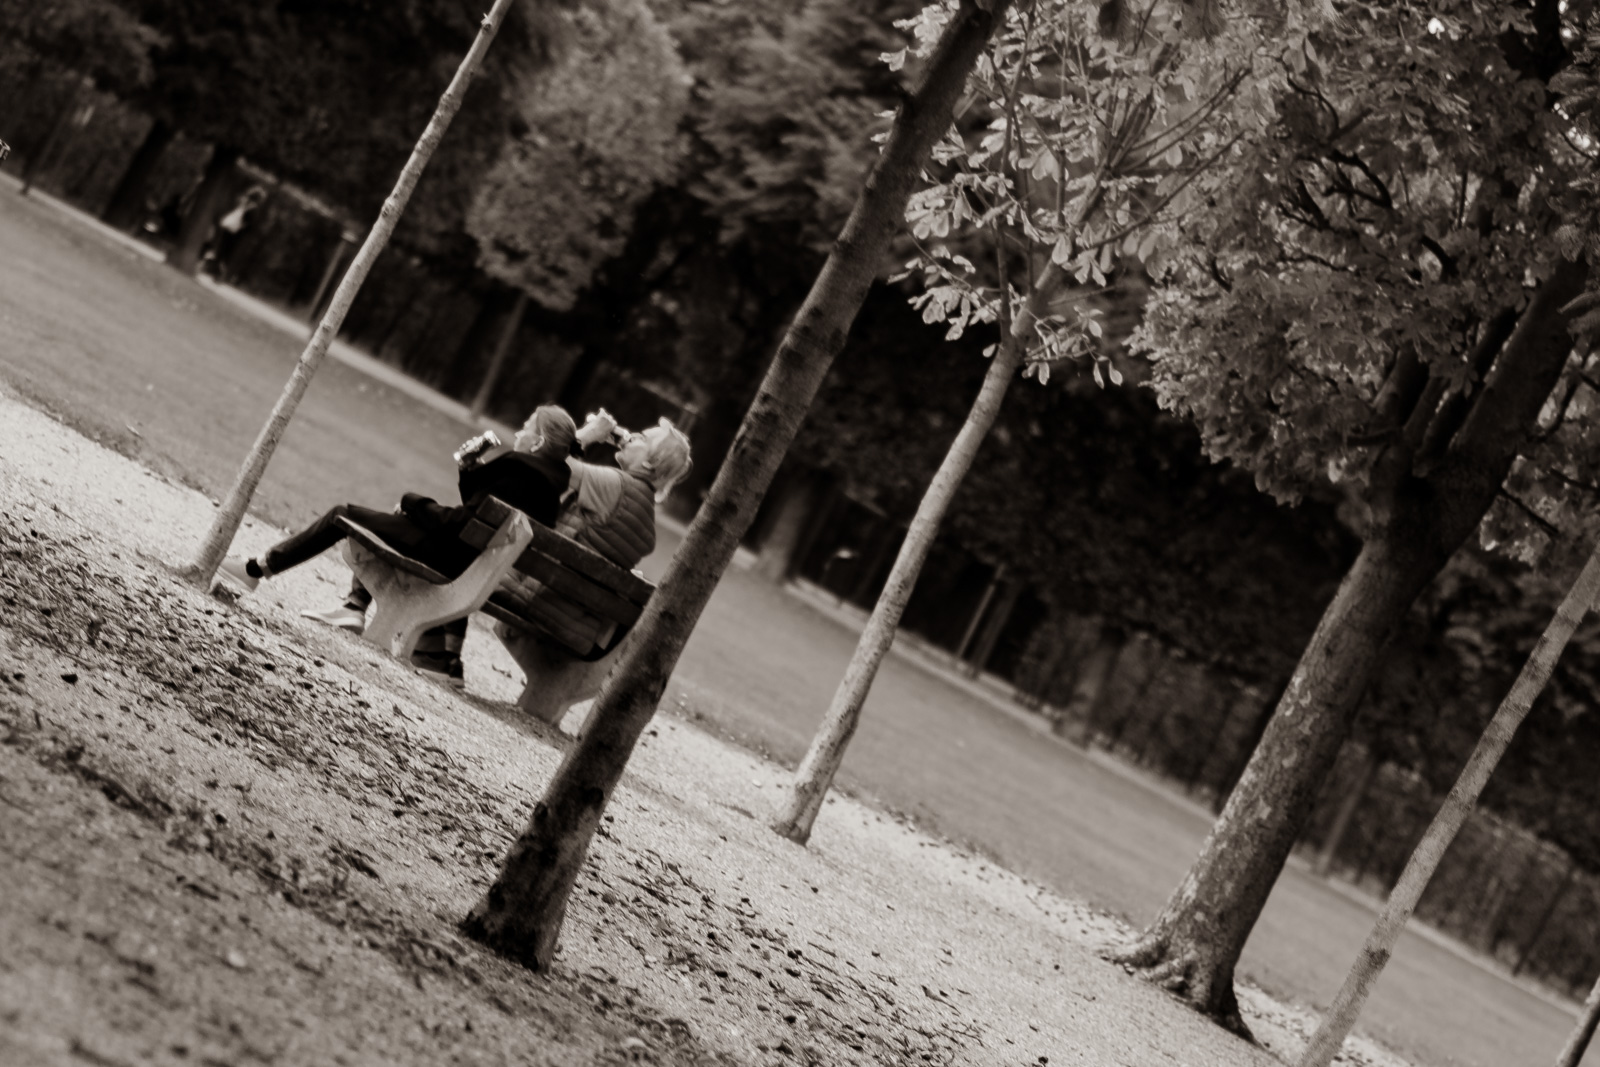 A couple sitting in the park drinking 